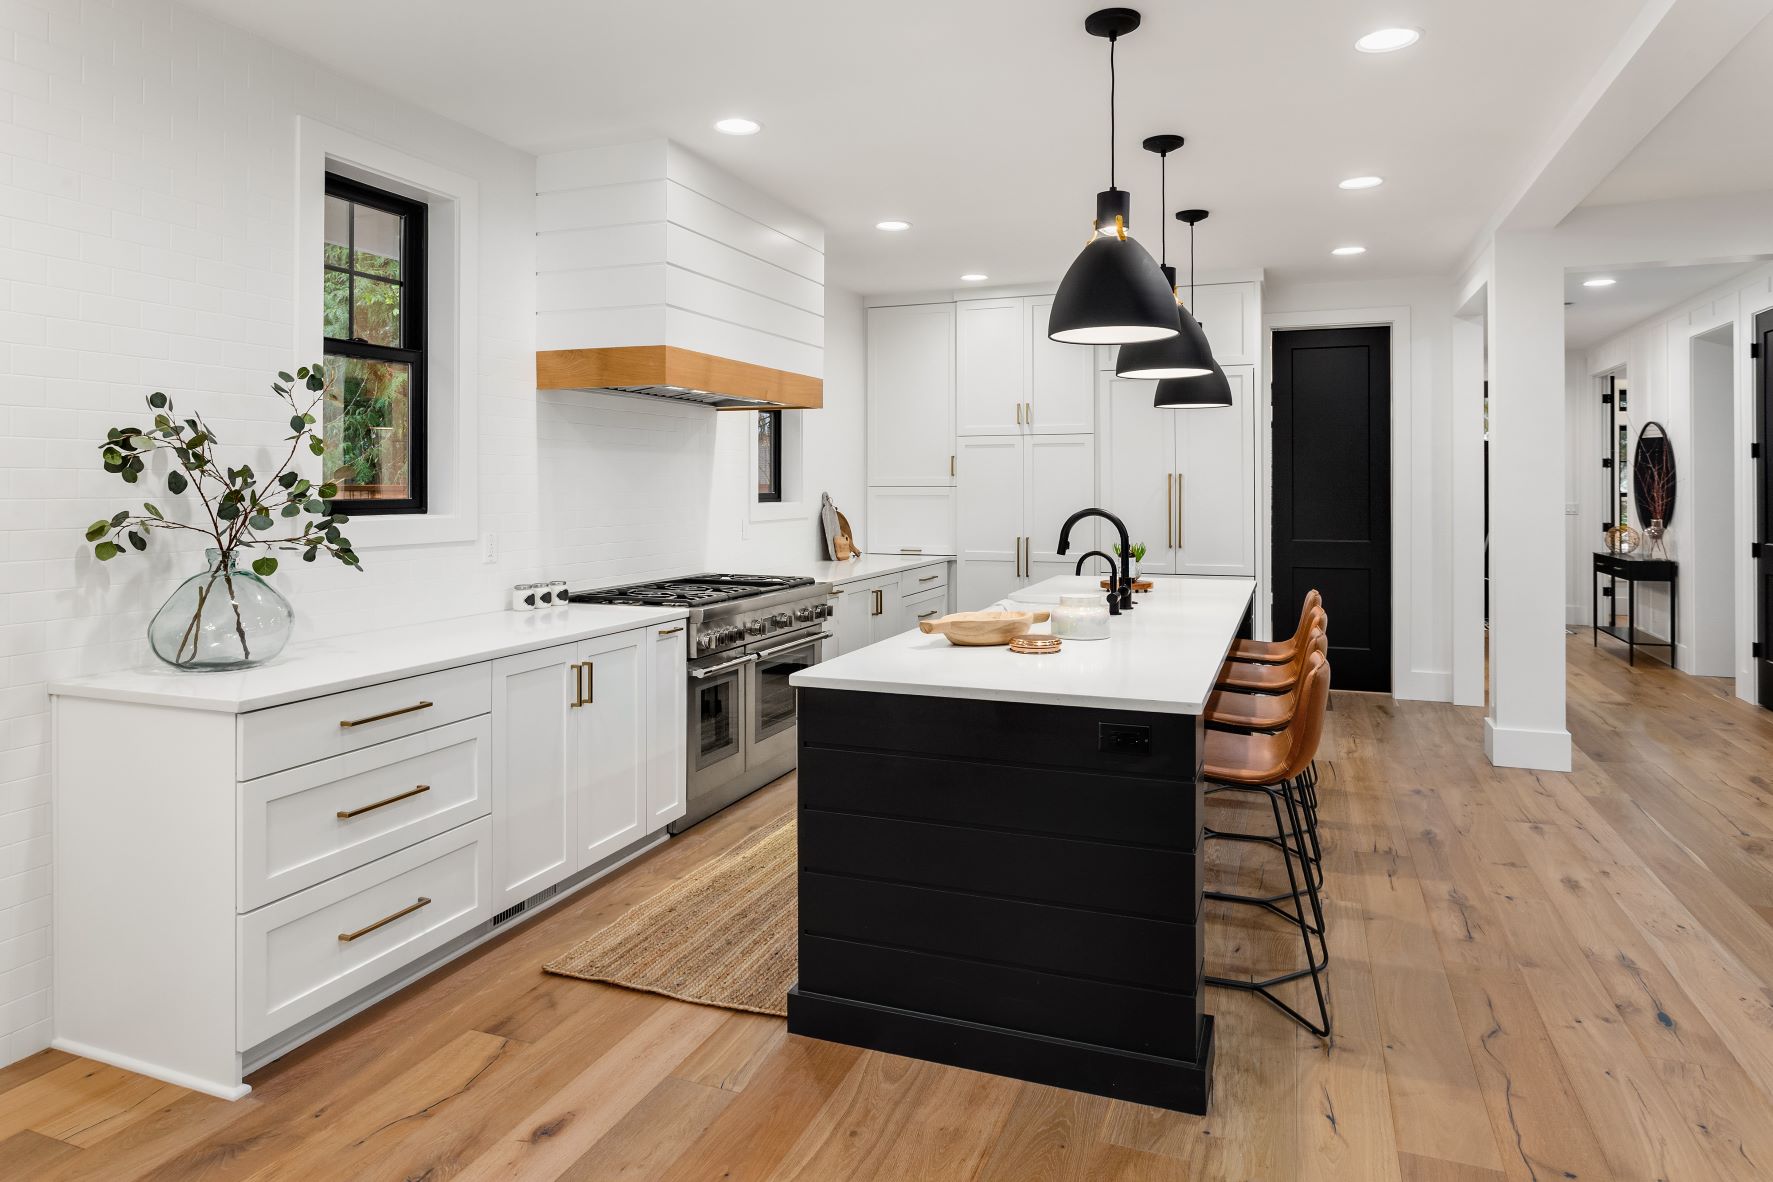 Tips On Choosing The Best Flooring For The Kitchen